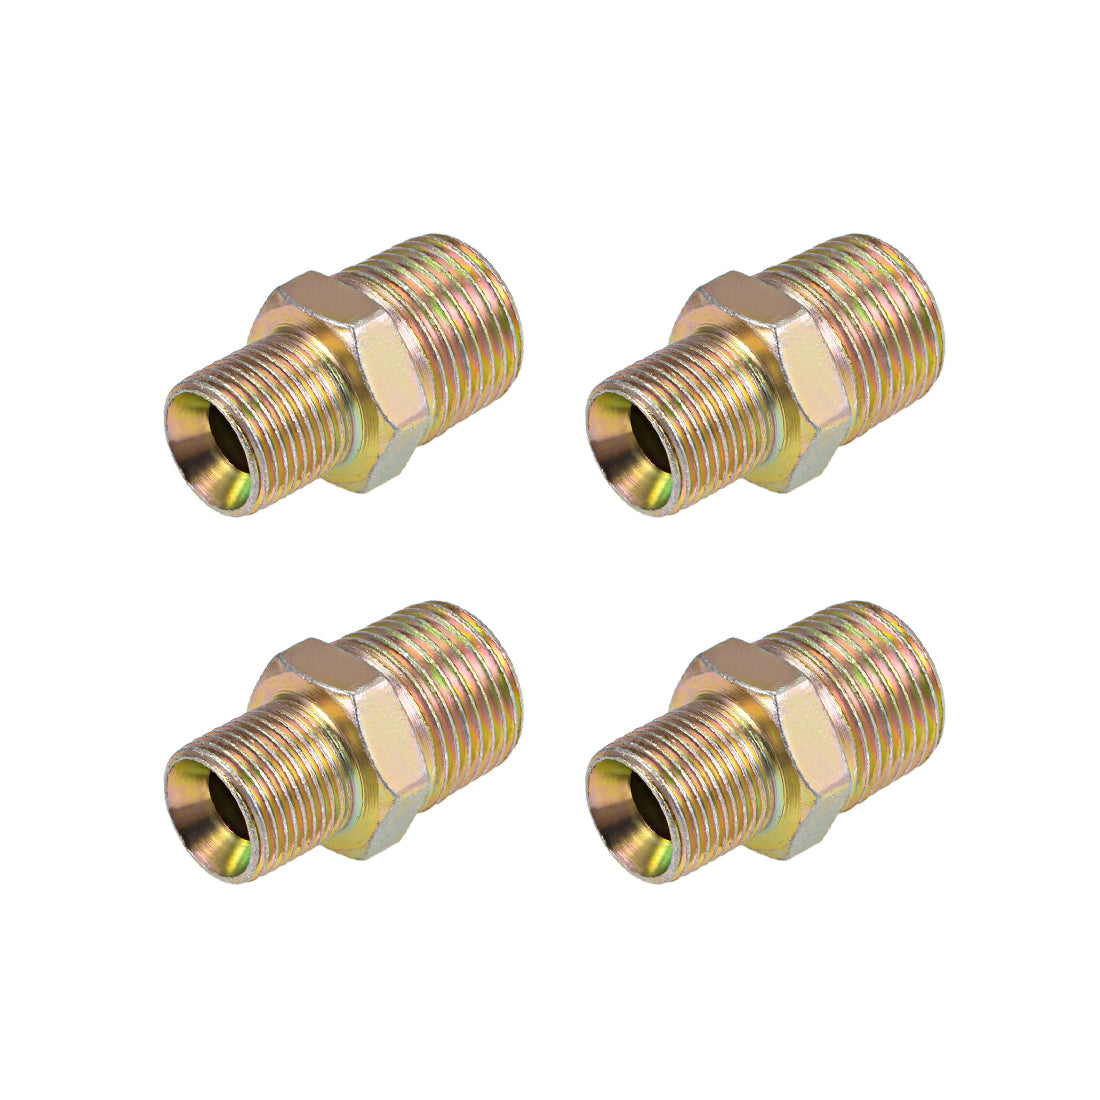 uxcell Uxcell Reducing Pipe Fitting - Reducer Hex Nipple - 1/2 X 3/8 BSP Male Connector Zinc Finish Plating 4Pcs